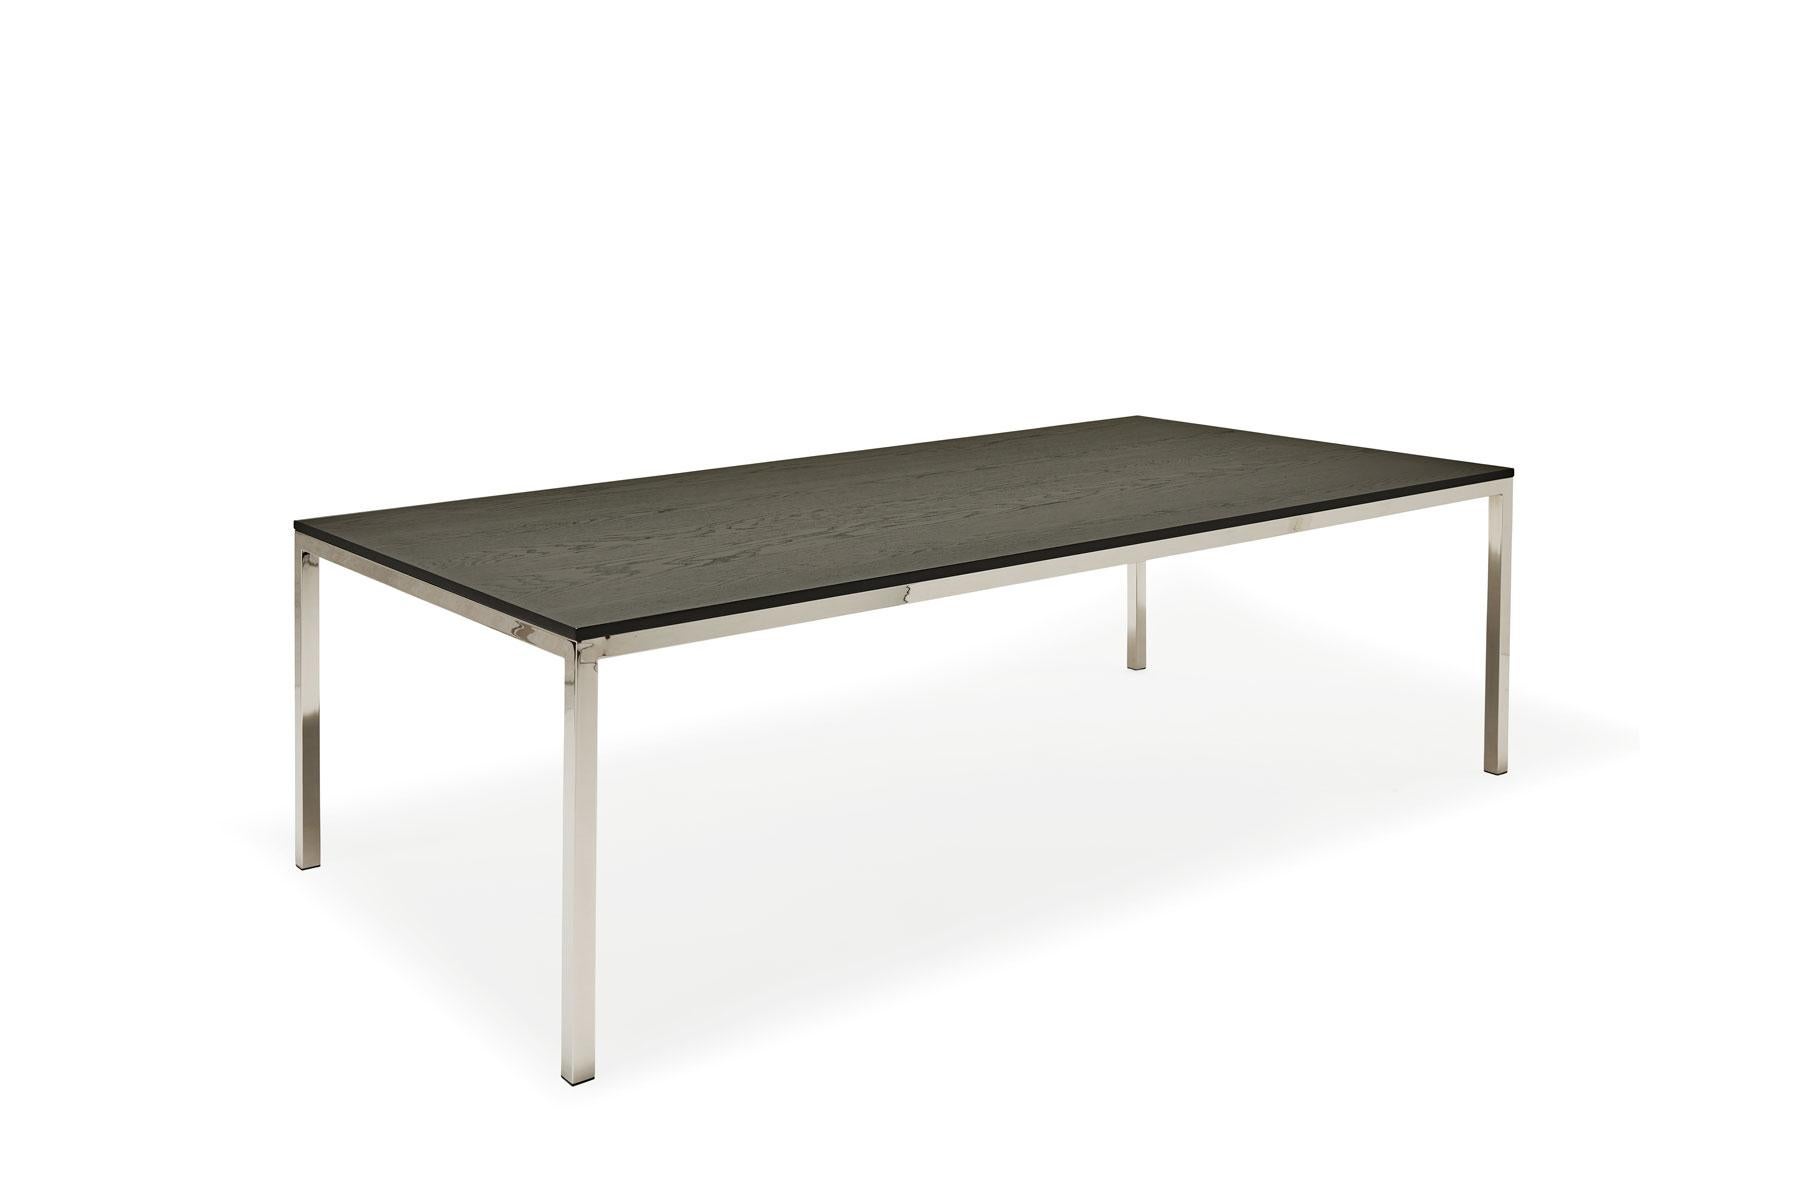 Clean lines and high quality materials are the basis of Stephen Kenn's Inheritance Collection. This simple yet elegant dining table can comfortably seat up to 10 guests, and features a solid ebonized oak tabletop with a polished nickel plated-steel